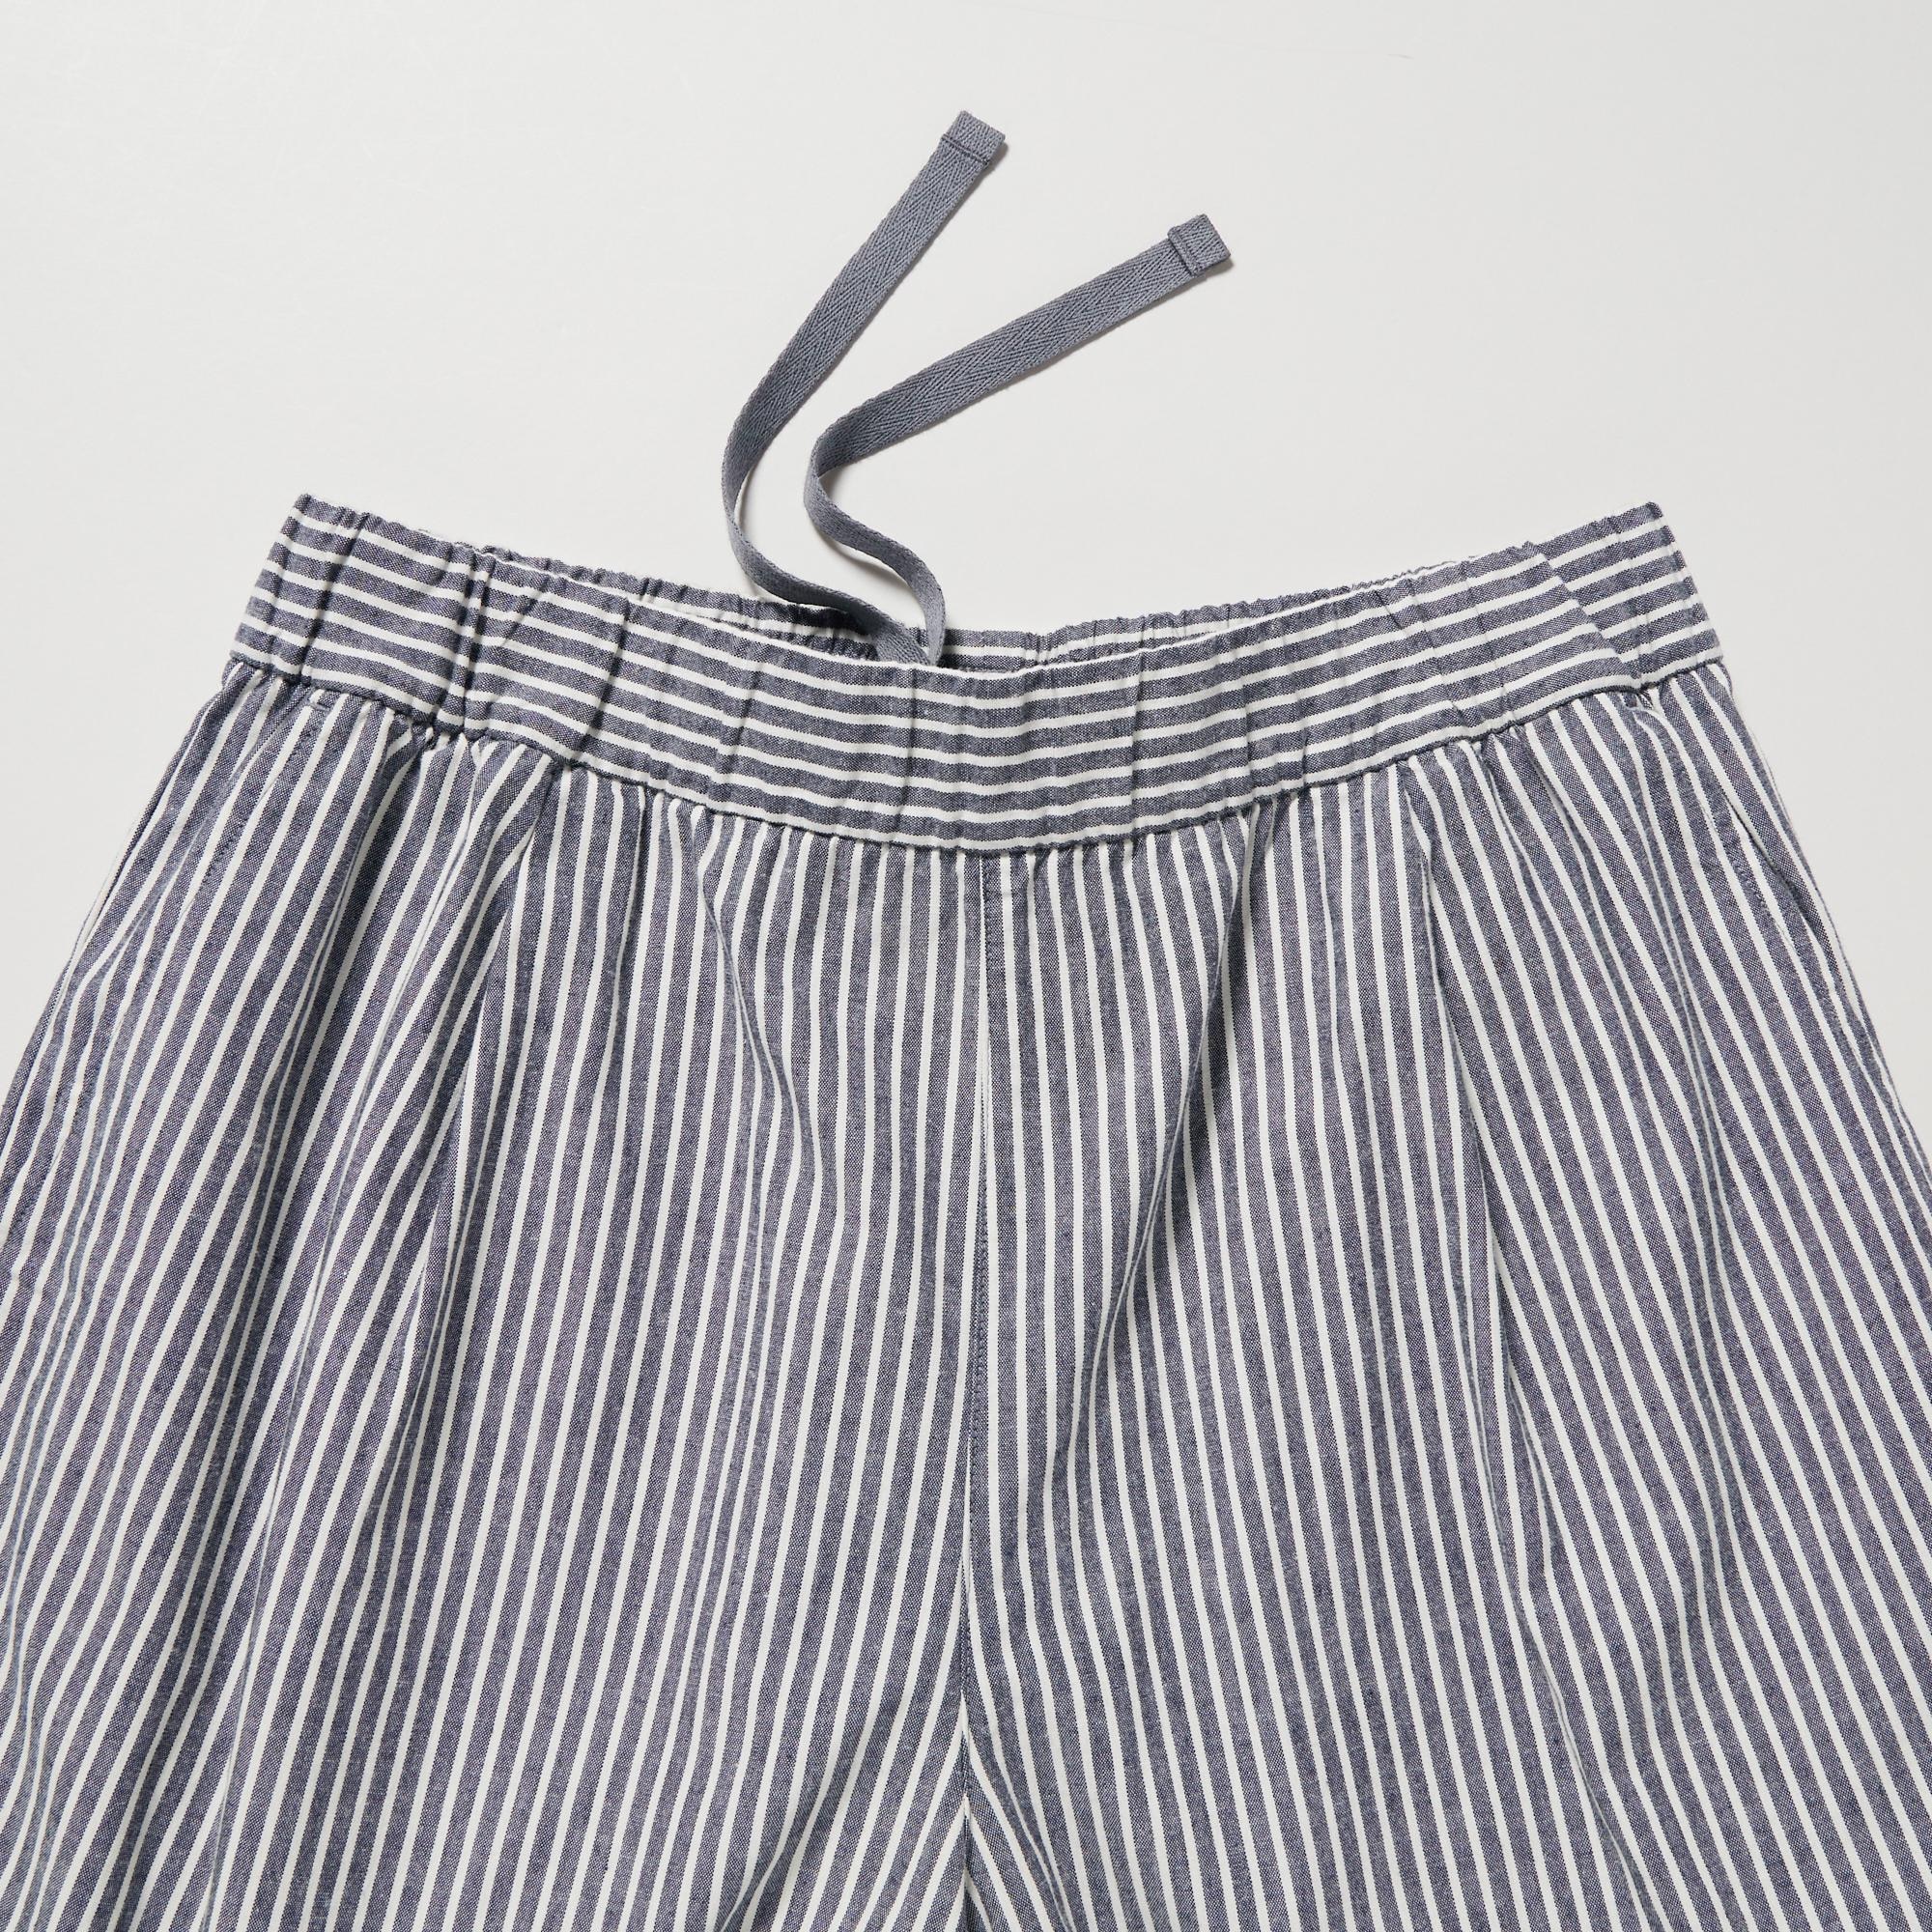 Cotton Striped Easy Shorts